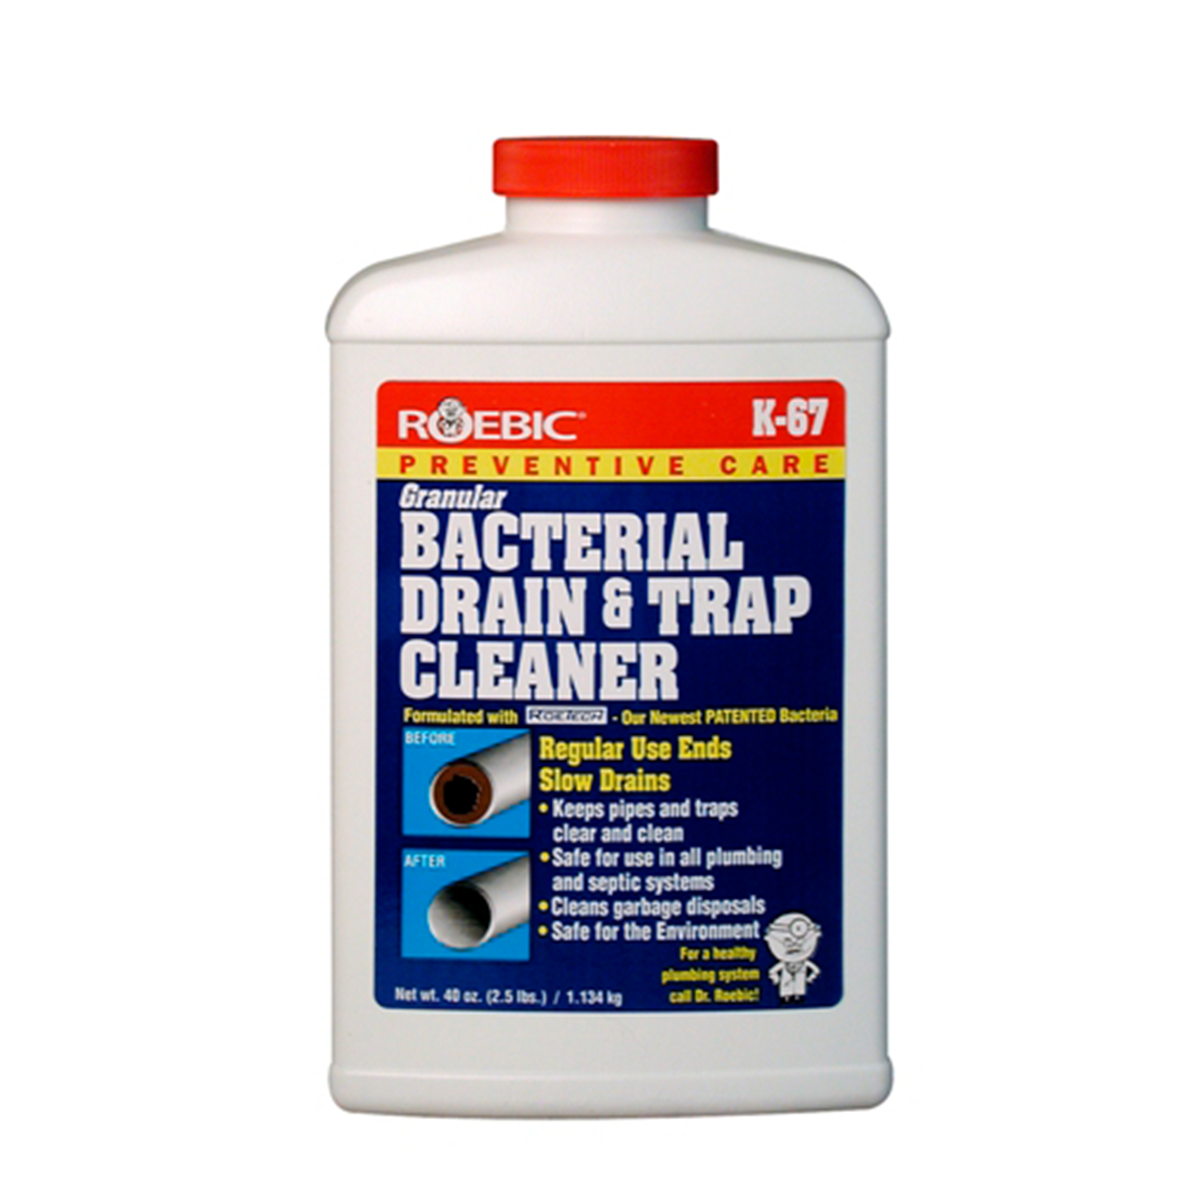 K67 Bacterial Drain & Trap Cleaner ForEarth Singapore